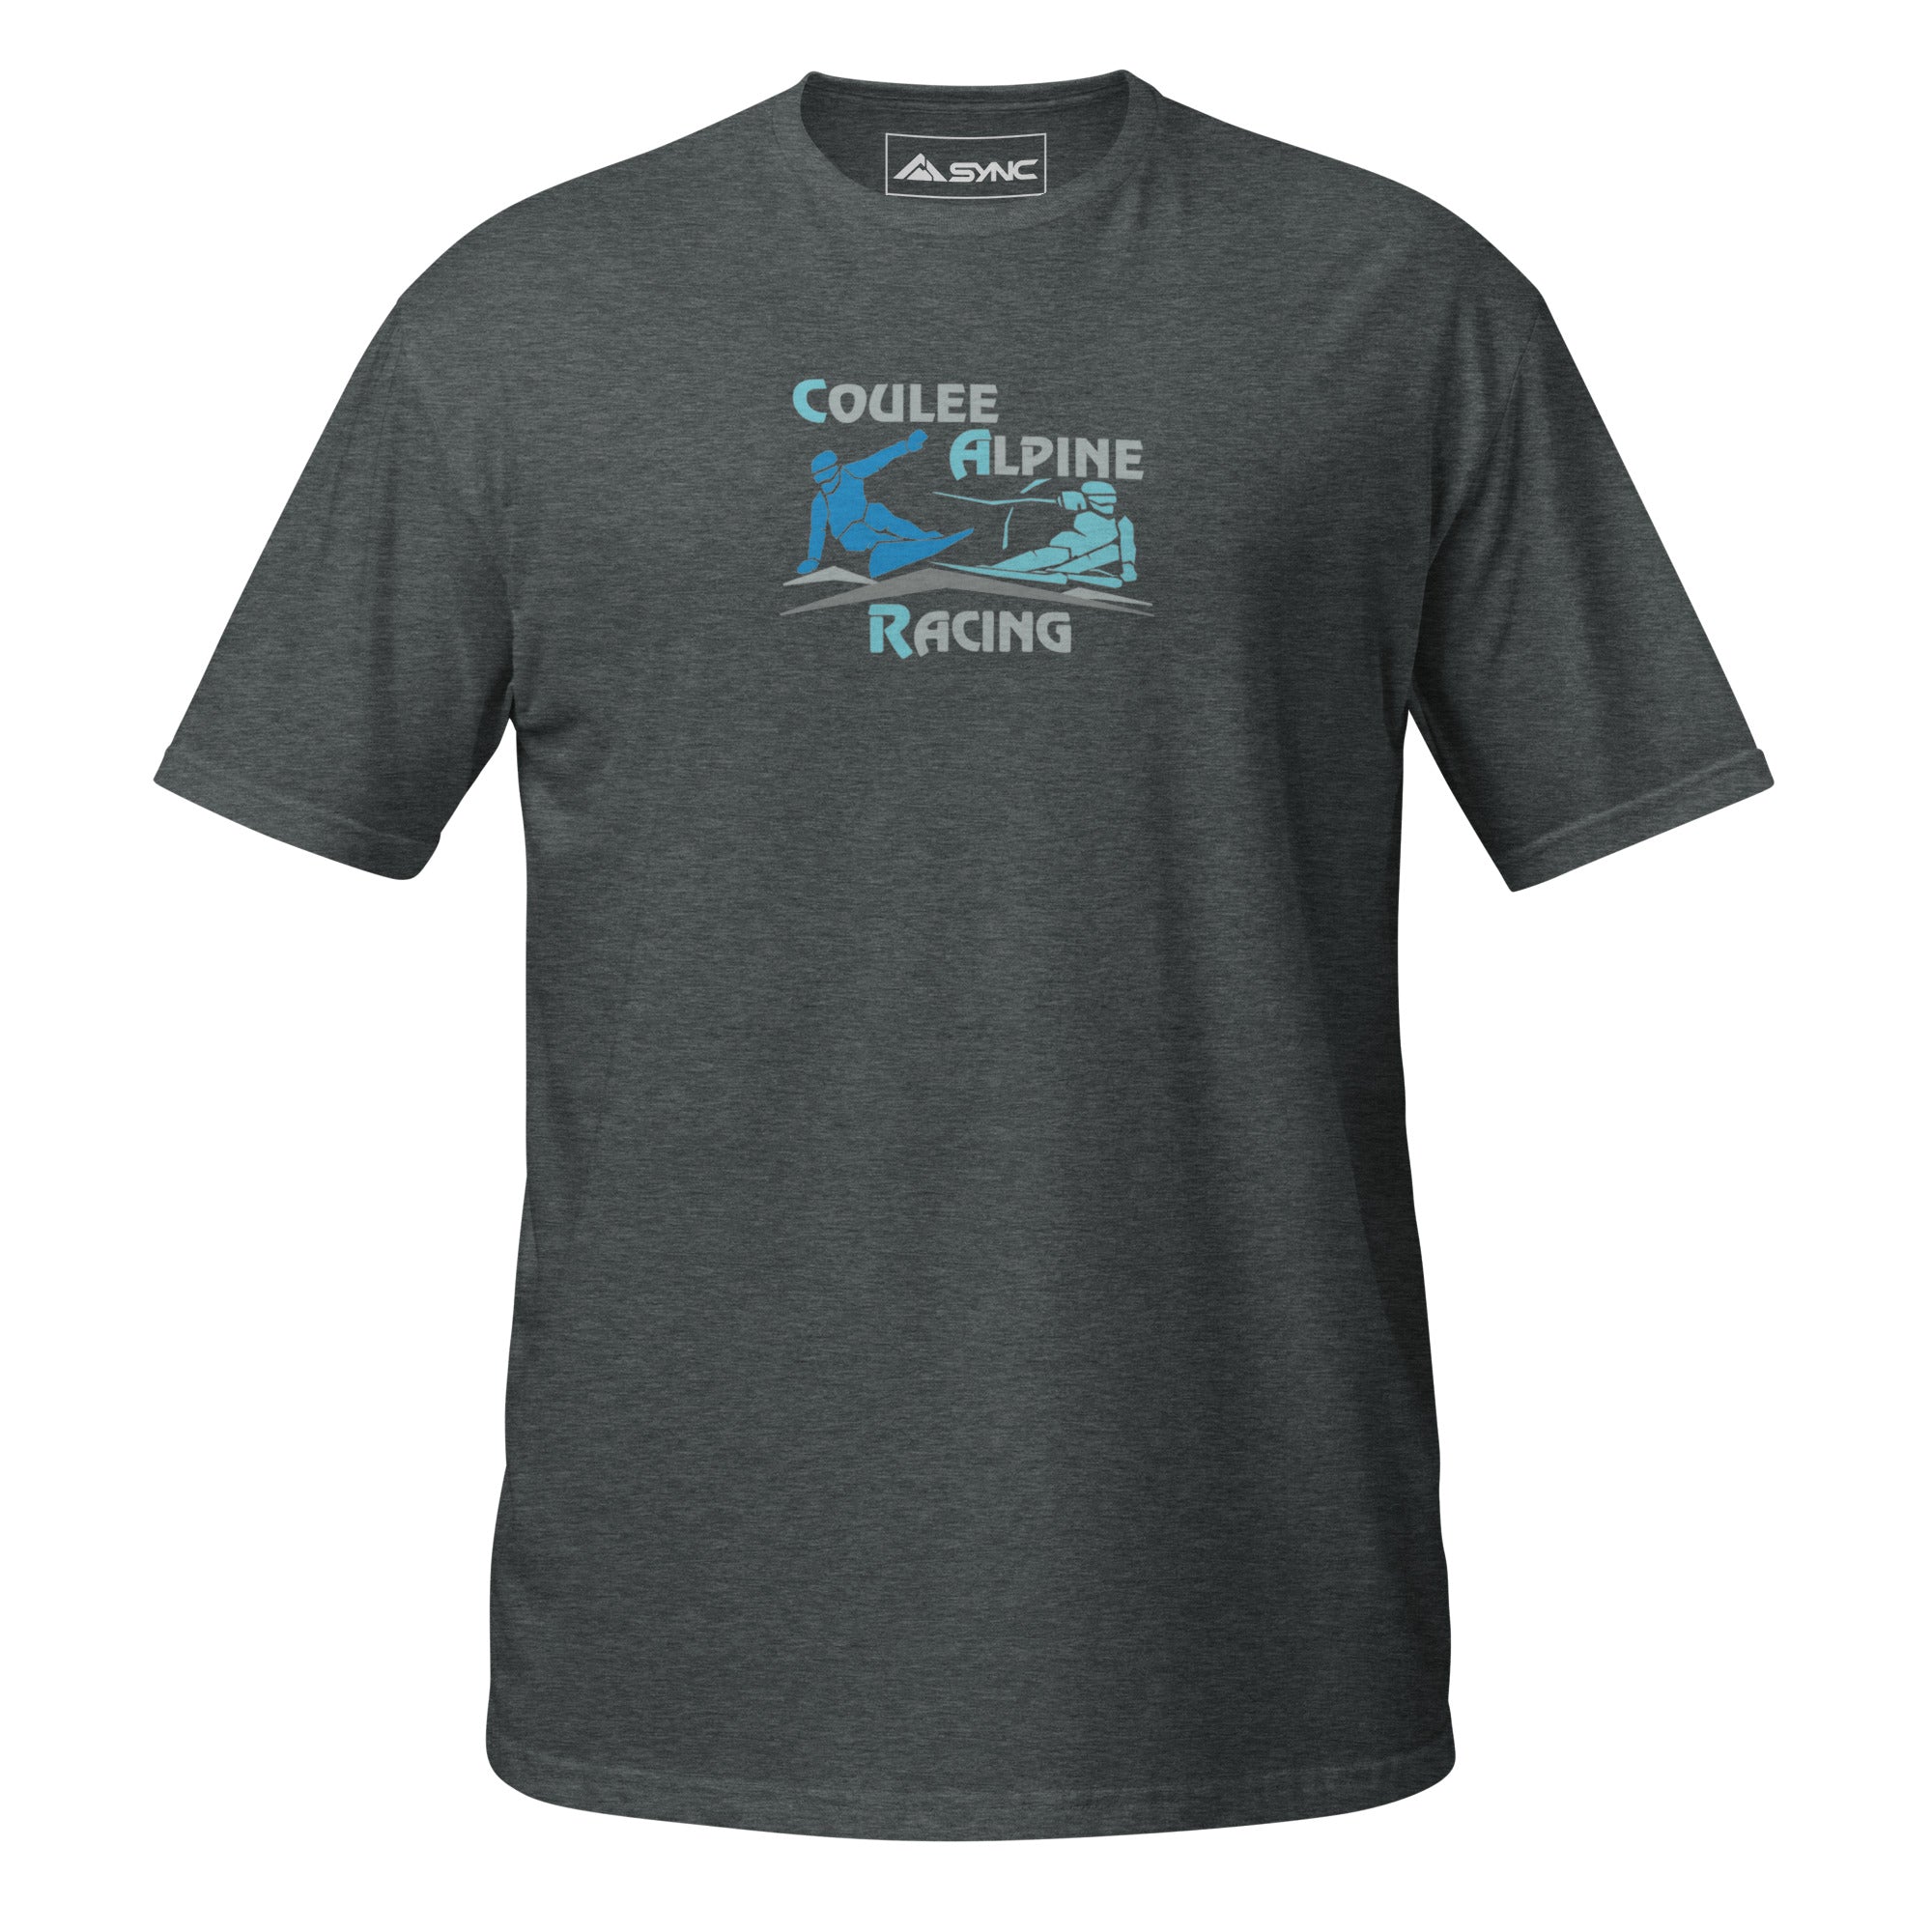 Adult Cotton T-Shirt - Coulee